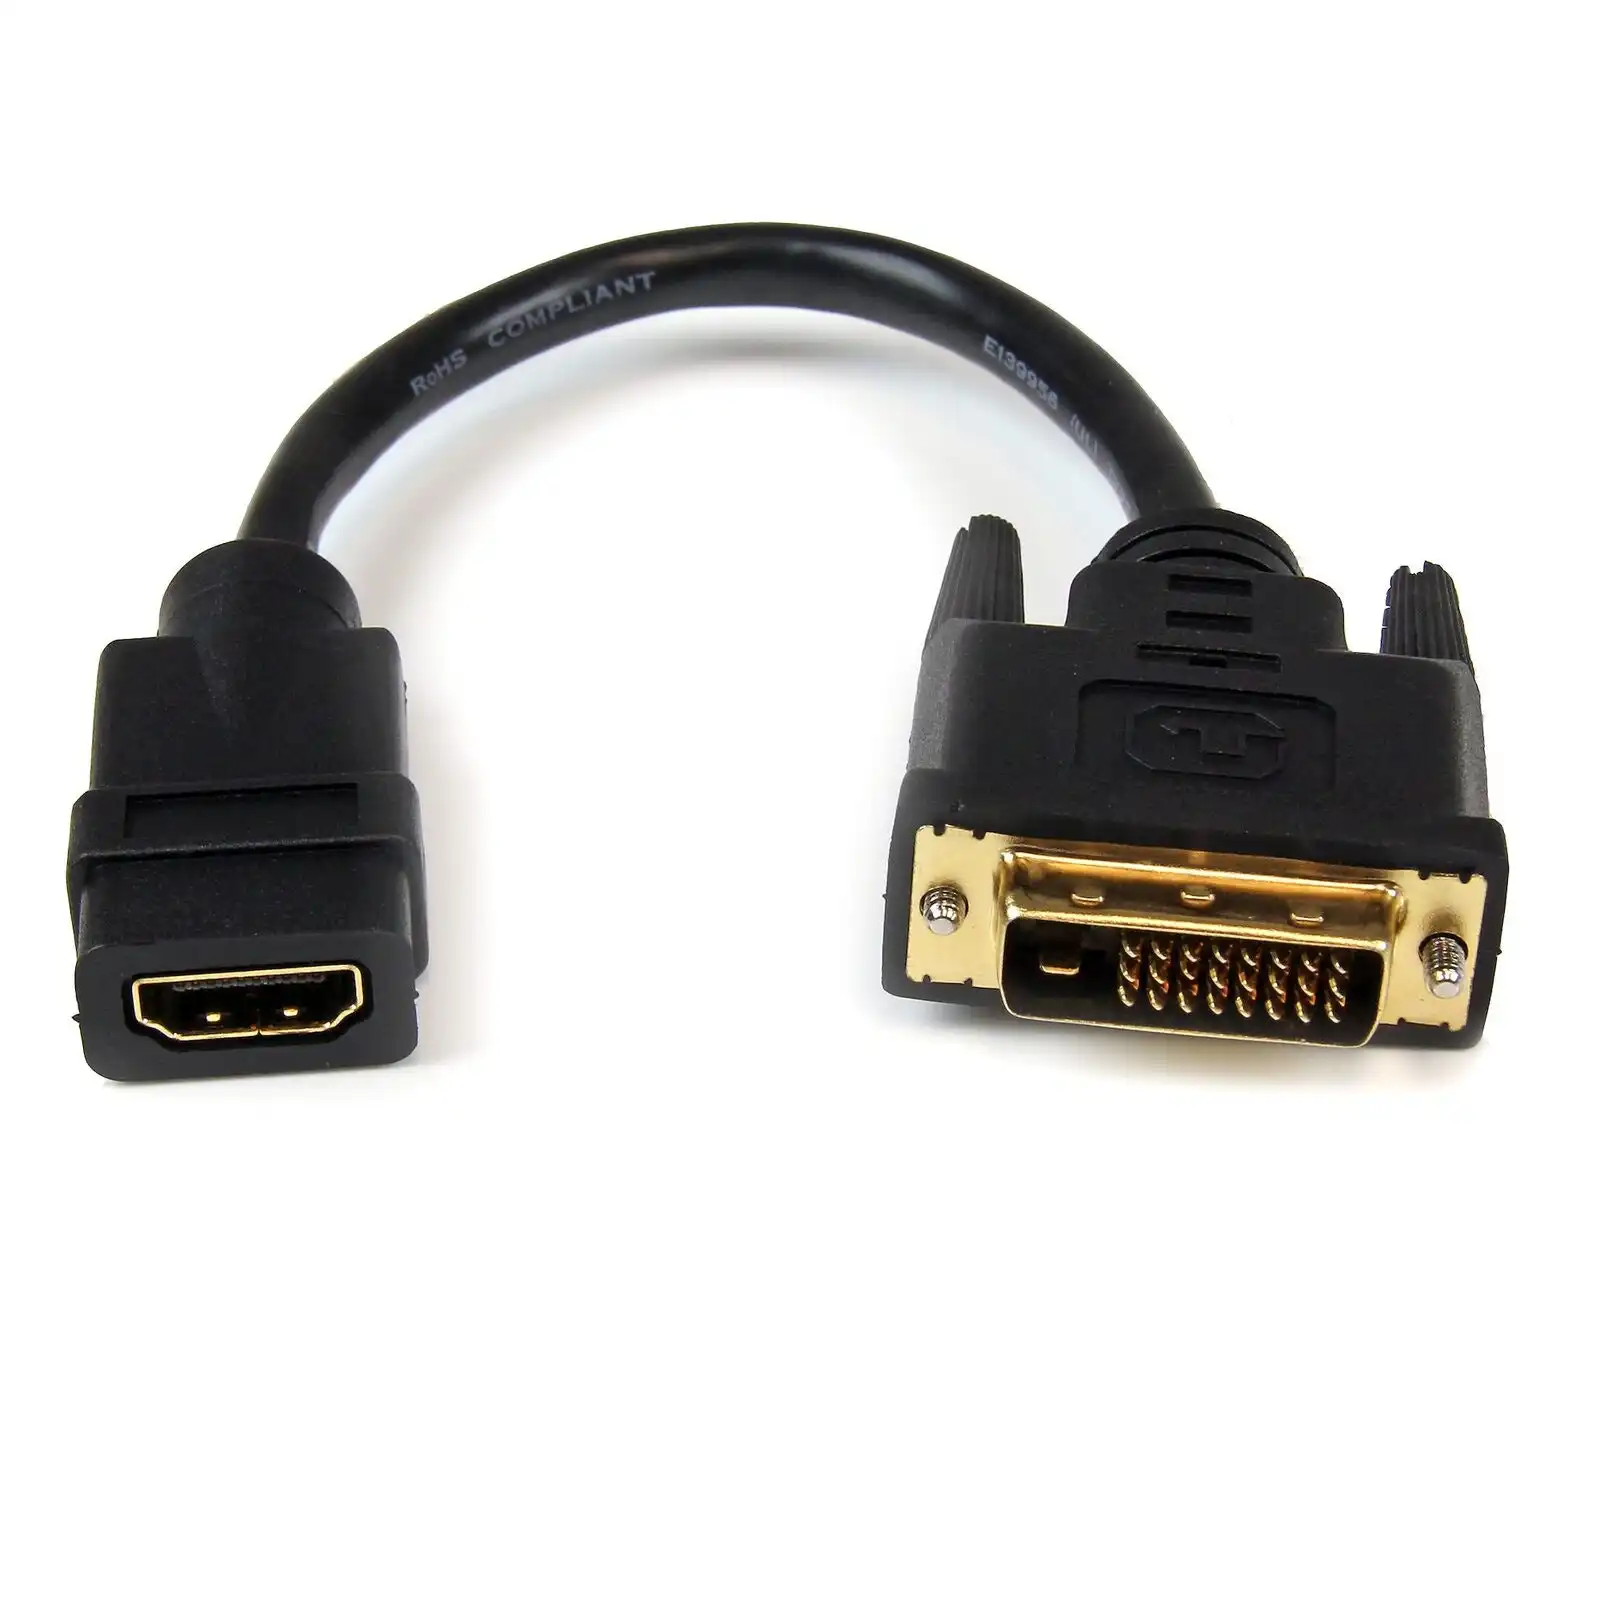 Star Tech 8in Female HDMI to Male DVI-D Video Cable Adapter for Laptop Black